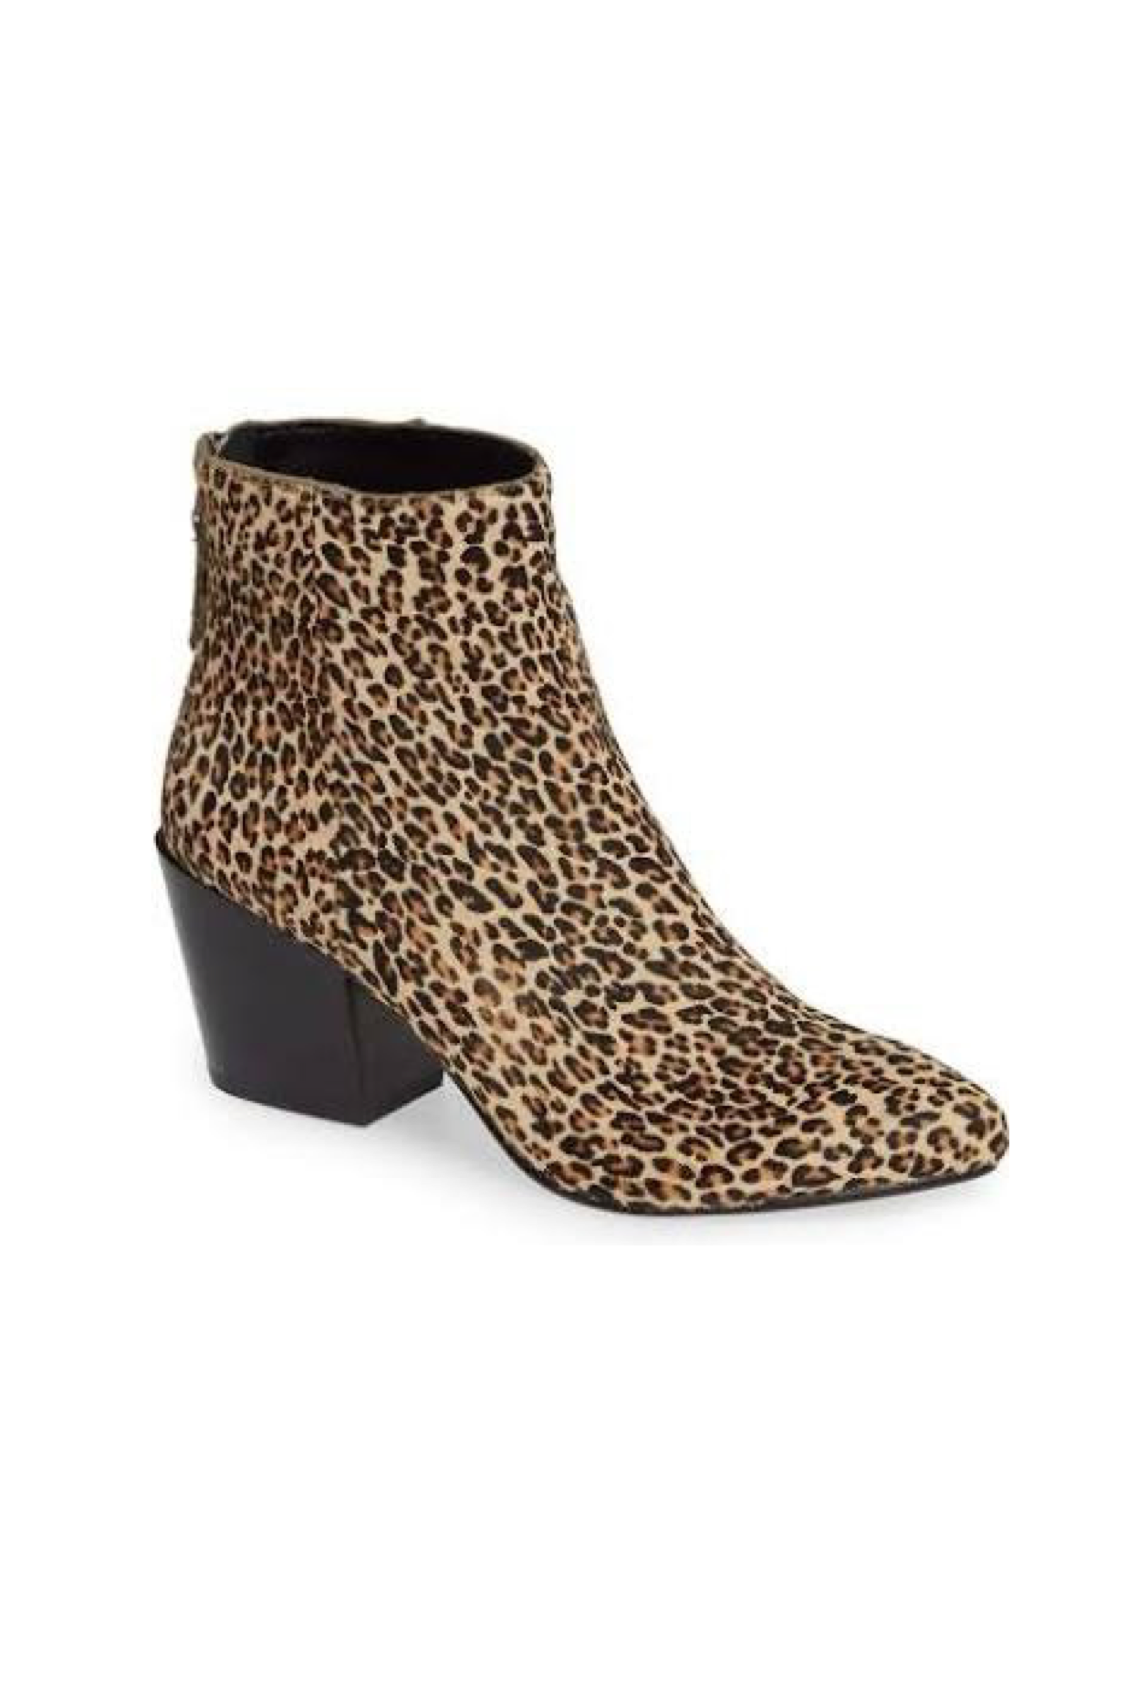 Coltyn Leopard Calf Hair Booties by 